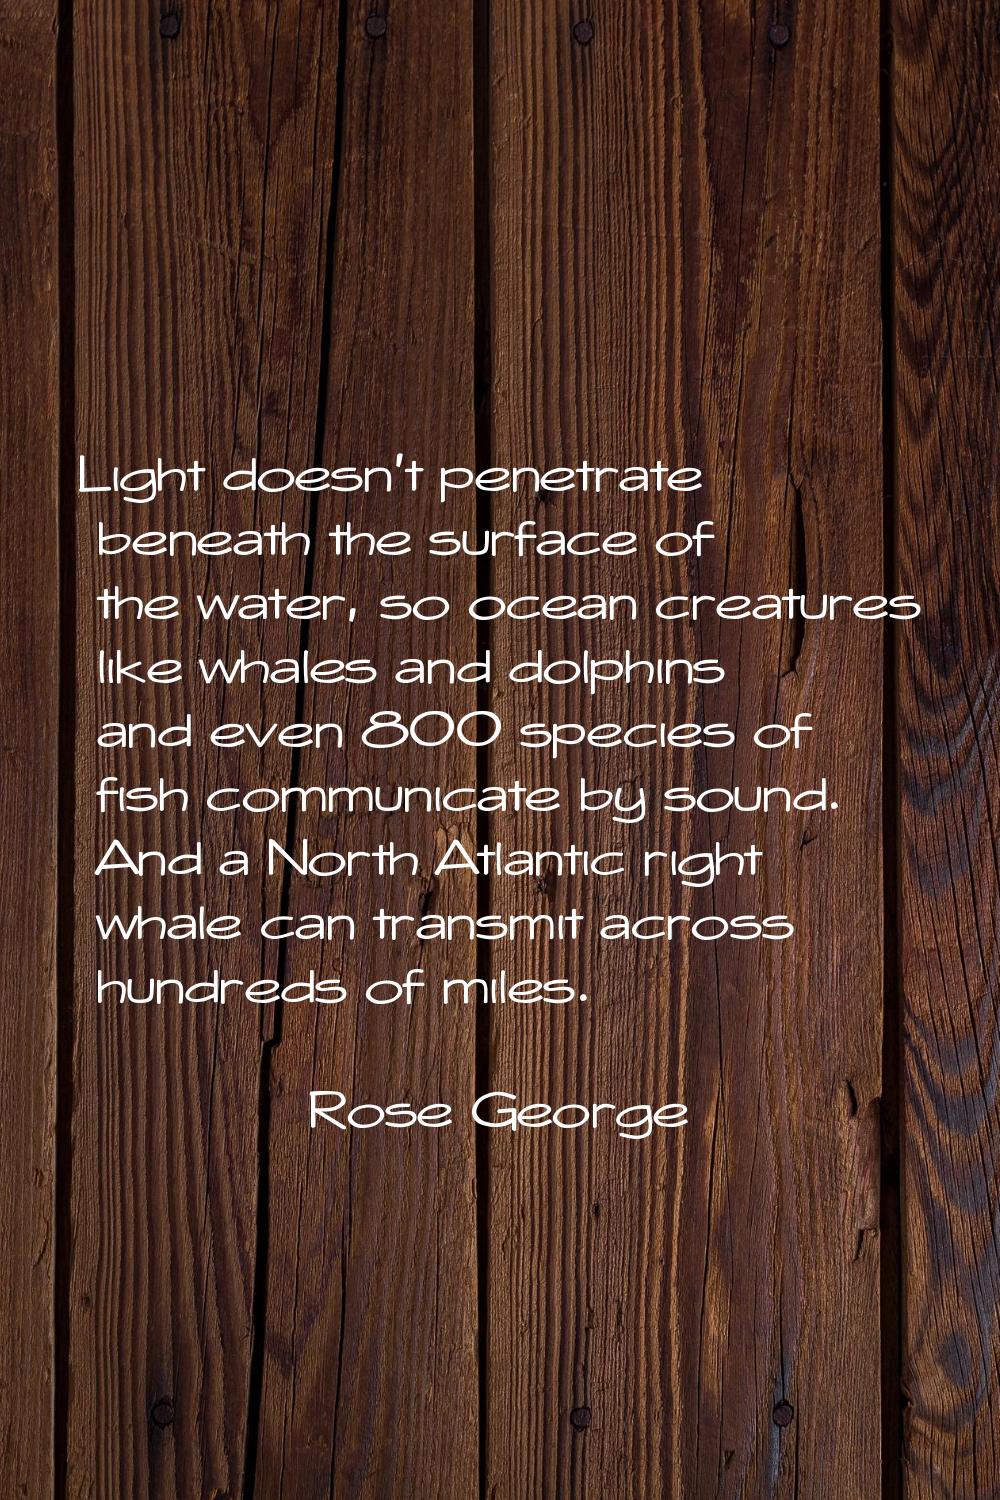 Light doesn't penetrate beneath the surface of the water, so ocean creatures like whales and dolphi